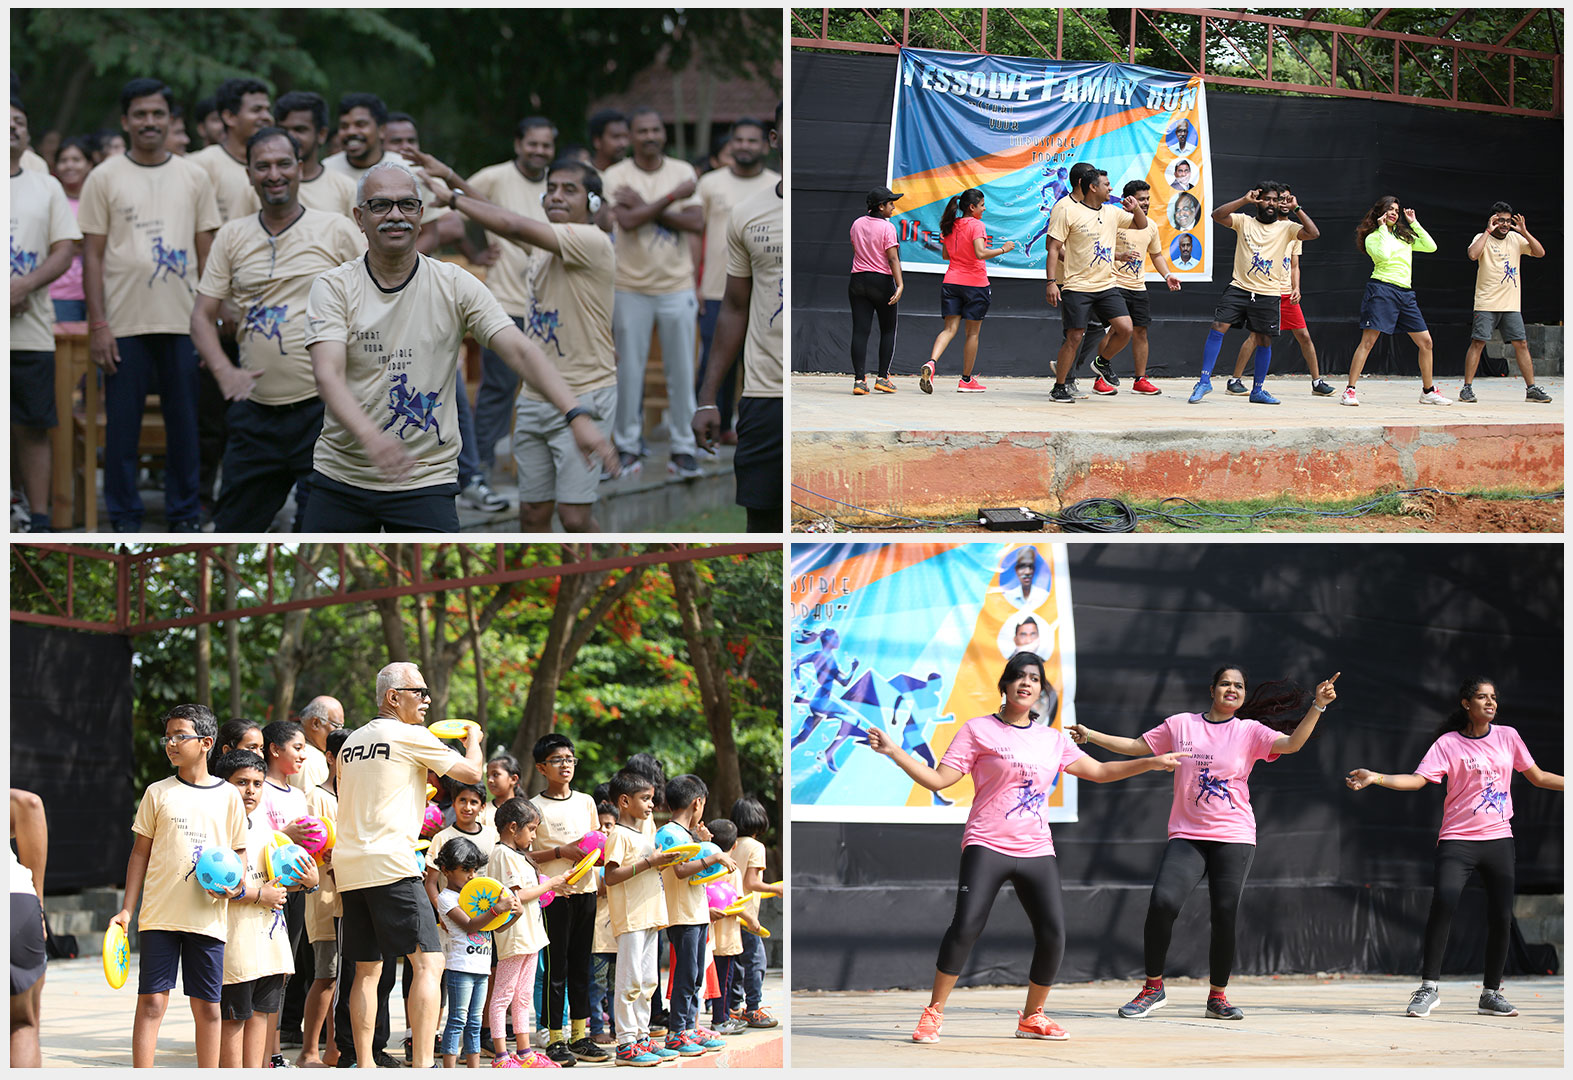 Tessolve Recently Organized A Successful Family Run With 400+ Employees Participation